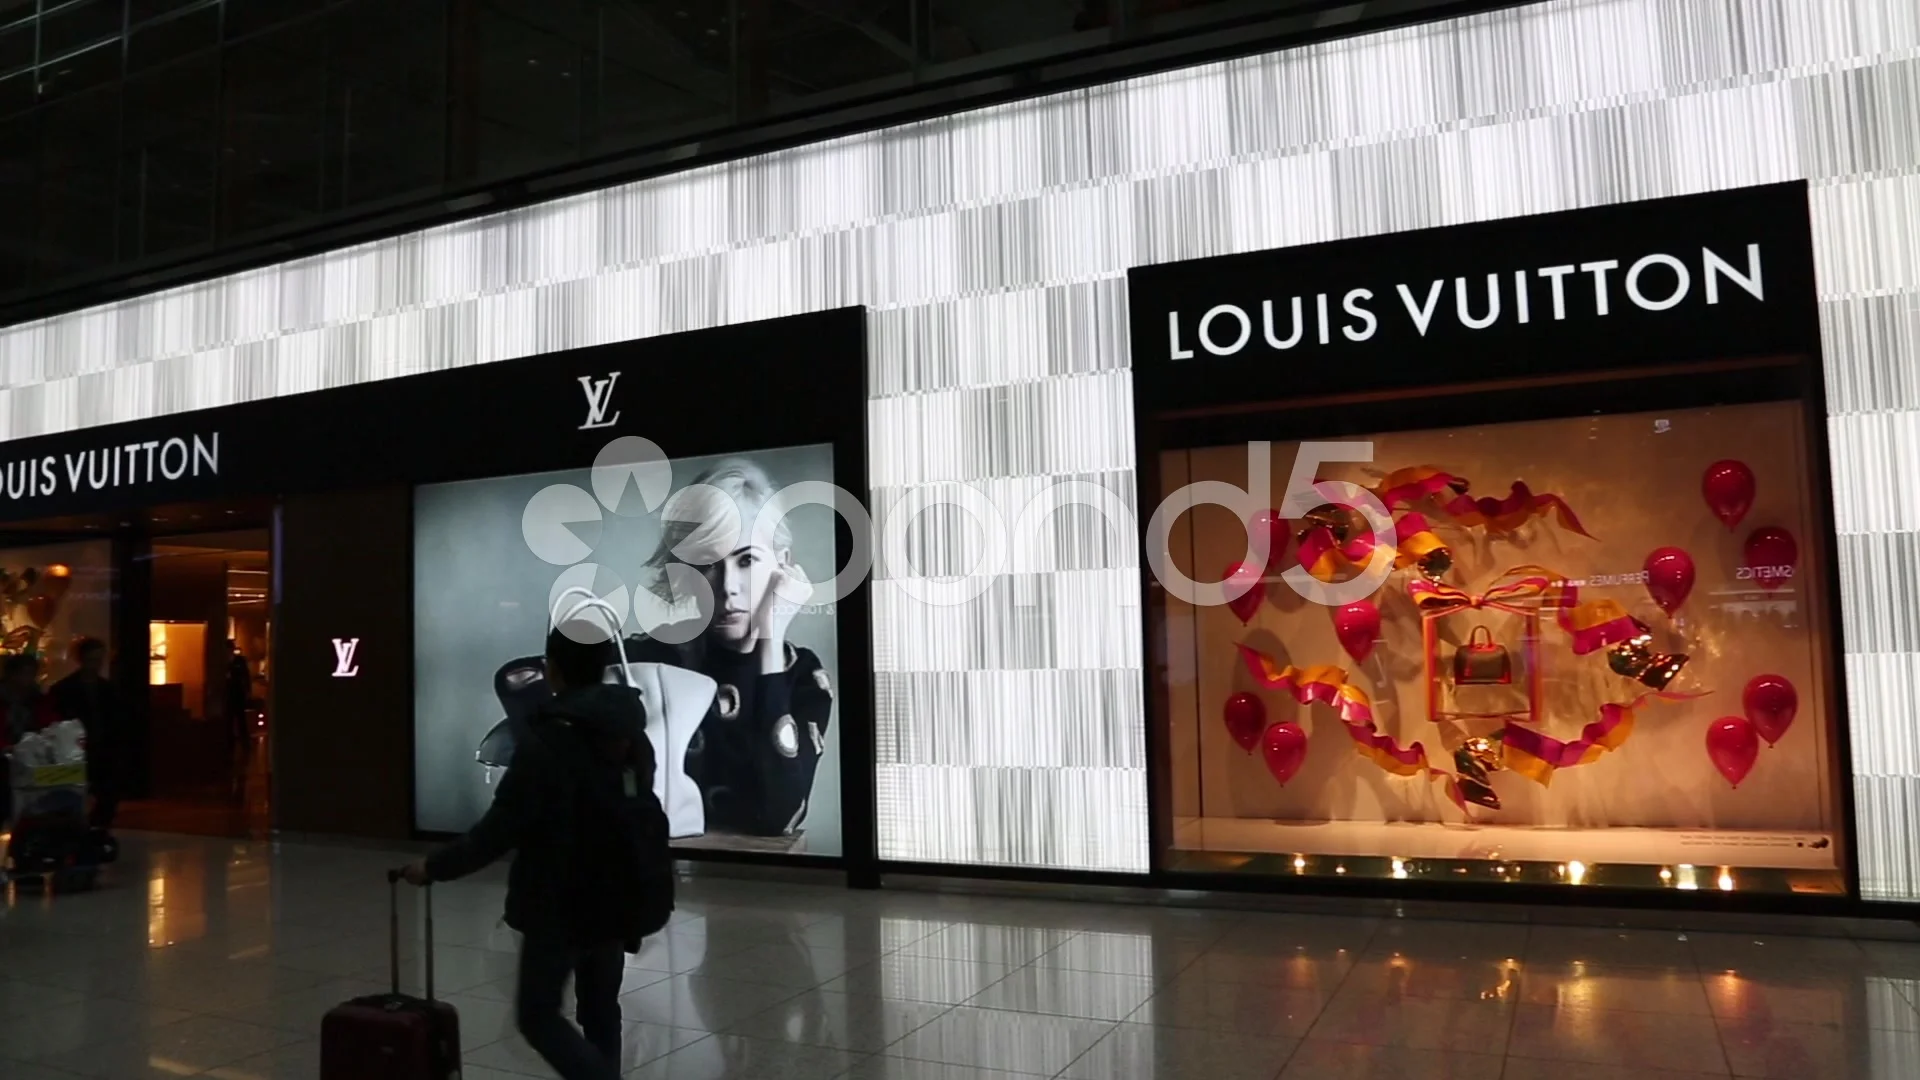 The story behind Louis Vuittons dutyfree store in China  Marksmen Daily   Your daily dose of insights and inspiration